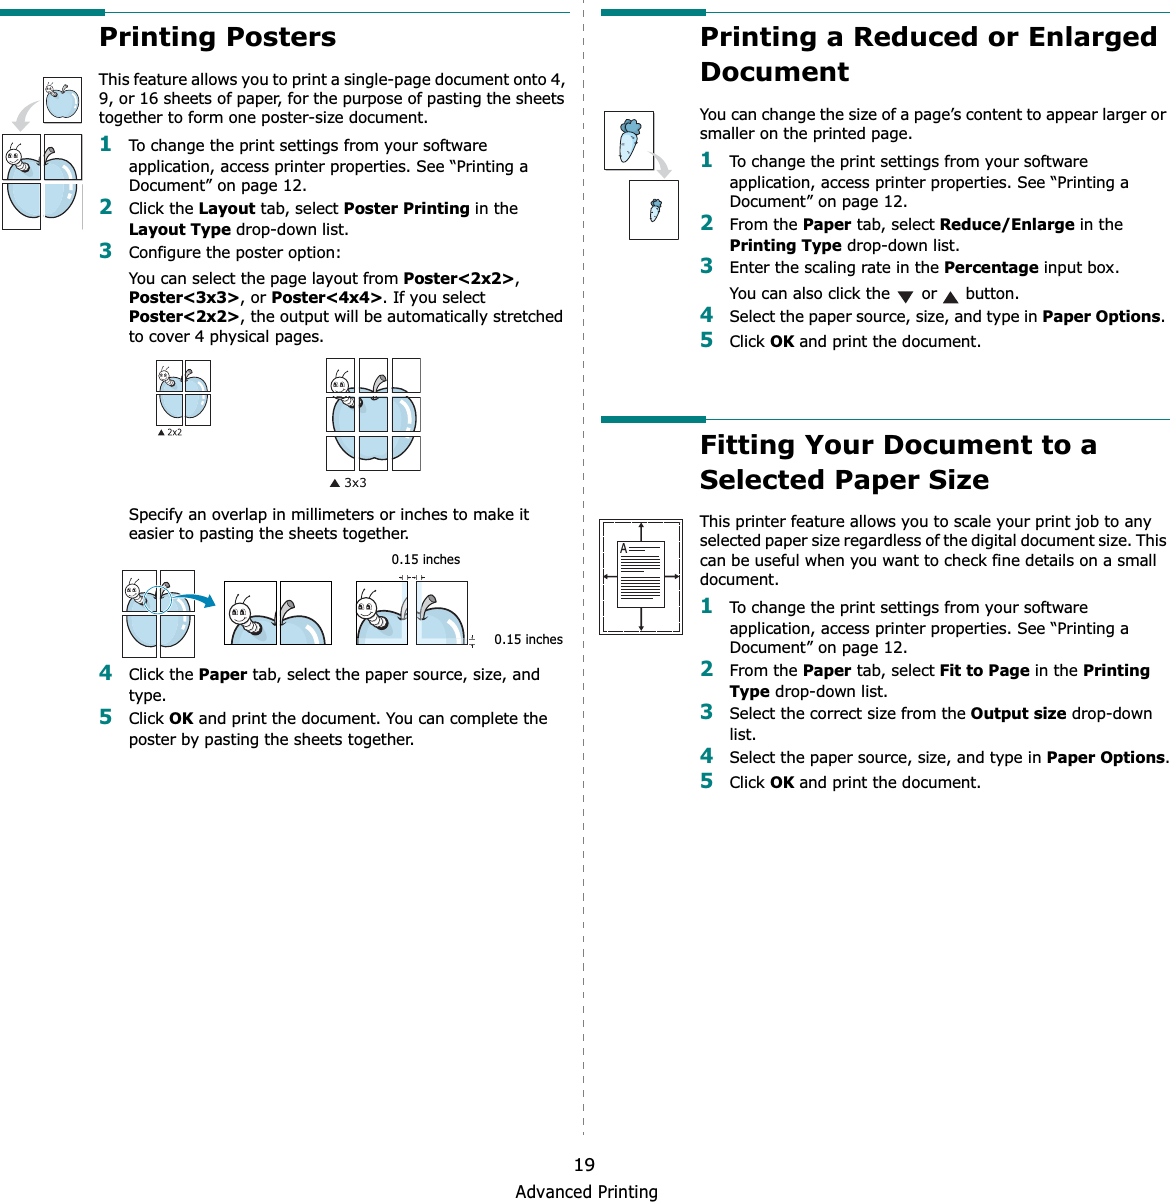 Advanced Printing19Printing PostersThis feature allows you to print a single-page document onto 4, 9, or 16 sheets of paper, for the purpose of pasting the sheets together to form one poster-size document.1To change the print settings from your software application, access printer properties. See “Printing a Document” on page 12.2Click the Layout tab, select Poster Printing in the Layout Type drop-down list.3Configure the poster option:You can select the page layout from Poster&lt;2x2&gt;,Poster&lt;3x3&gt;, or Poster&lt;4x4&gt;. If you select Poster&lt;2x2&gt;, the output will be automatically stretched to cover 4 physical pages. Specify an overlap in millimeters or inches to make it easier to pasting the sheets together. 4Click the Paper tab, select the paper source, size, and type.5Click OK and print the document. You can complete the poster by pasting the sheets together. 0.15 inches0.15 inchesPrinting a Reduced or Enlarged Document You can change the size of a page’s content to appear larger or smaller on the printed page. 1To change the print settings from your software application, access printer properties. See “Printing a Document” on page 12. 2From the Paper tab, select Reduce/Enlarge in the Printing Type drop-down list. 3Enter the scaling rate in the Percentage input box.You can also click the   or   button.4Select the paper source, size, and type in Paper Options.5Click OK and print the document. Fitting Your Document to a Selected Paper SizeThis printer feature allows you to scale your print job to any selected paper size regardless of the digital document size. This can be useful when you want to check fine details on a small document. 1To change the print settings from your software application, access printer properties. See “Printing a Document” on page 12.2From the Paper tab, select Fit to Page in the Printing Type drop-down list. 3Select the correct size from the Output size drop-down list.4Select the paper source, size, and type in Paper Options.5Click OK and print the document.A